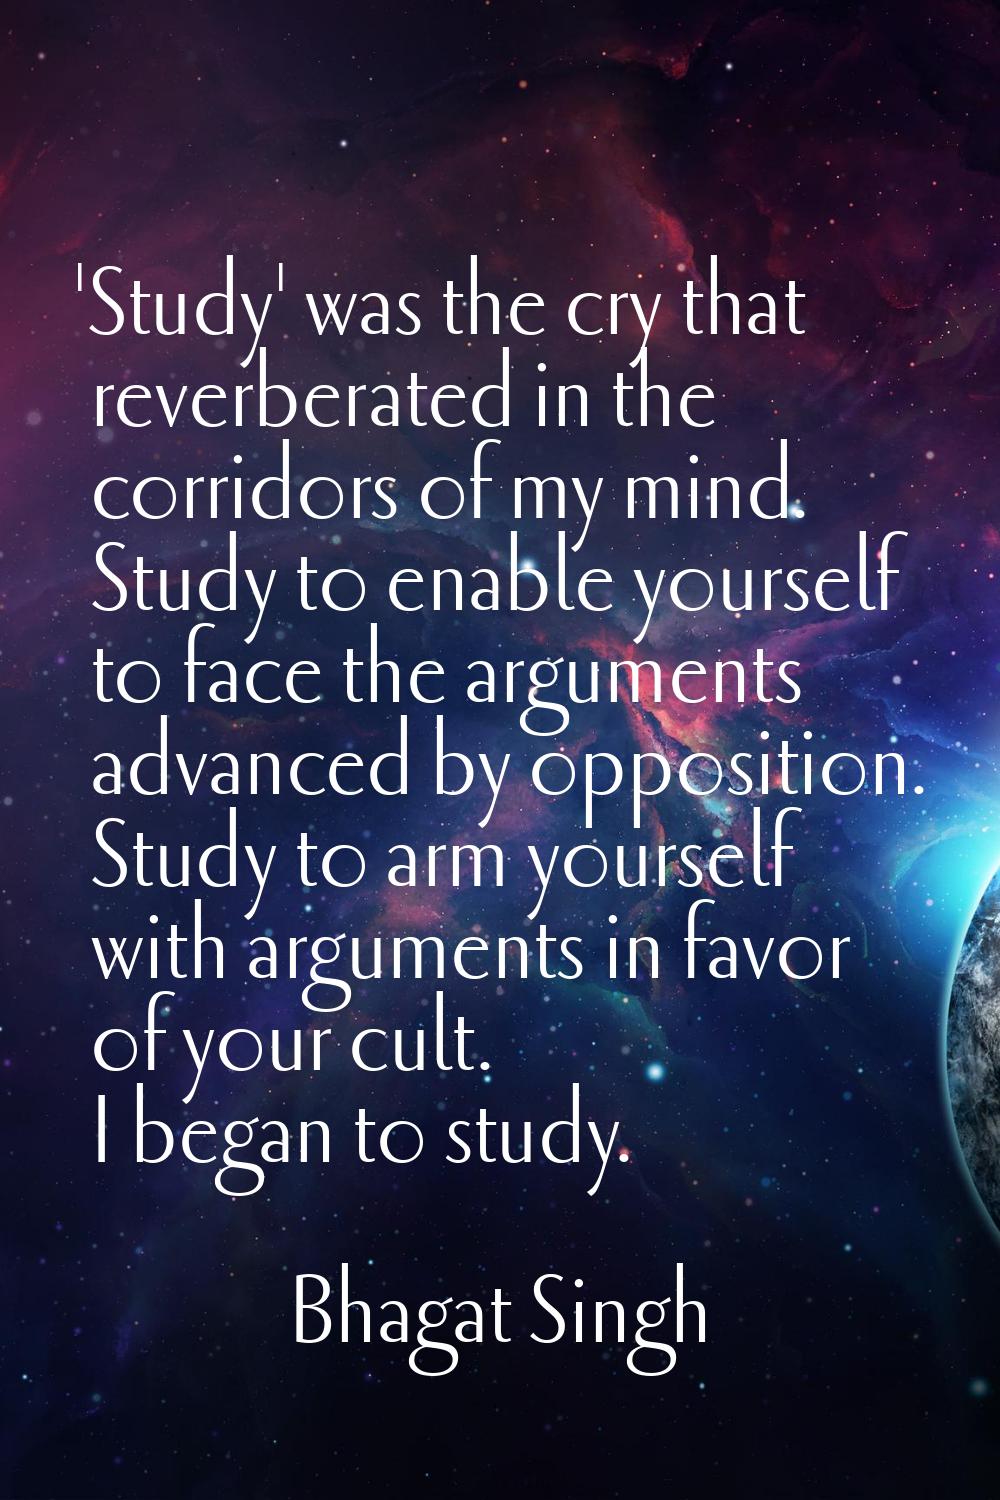 'Study' was the cry that reverberated in the corridors of my mind. Study to enable yourself to face